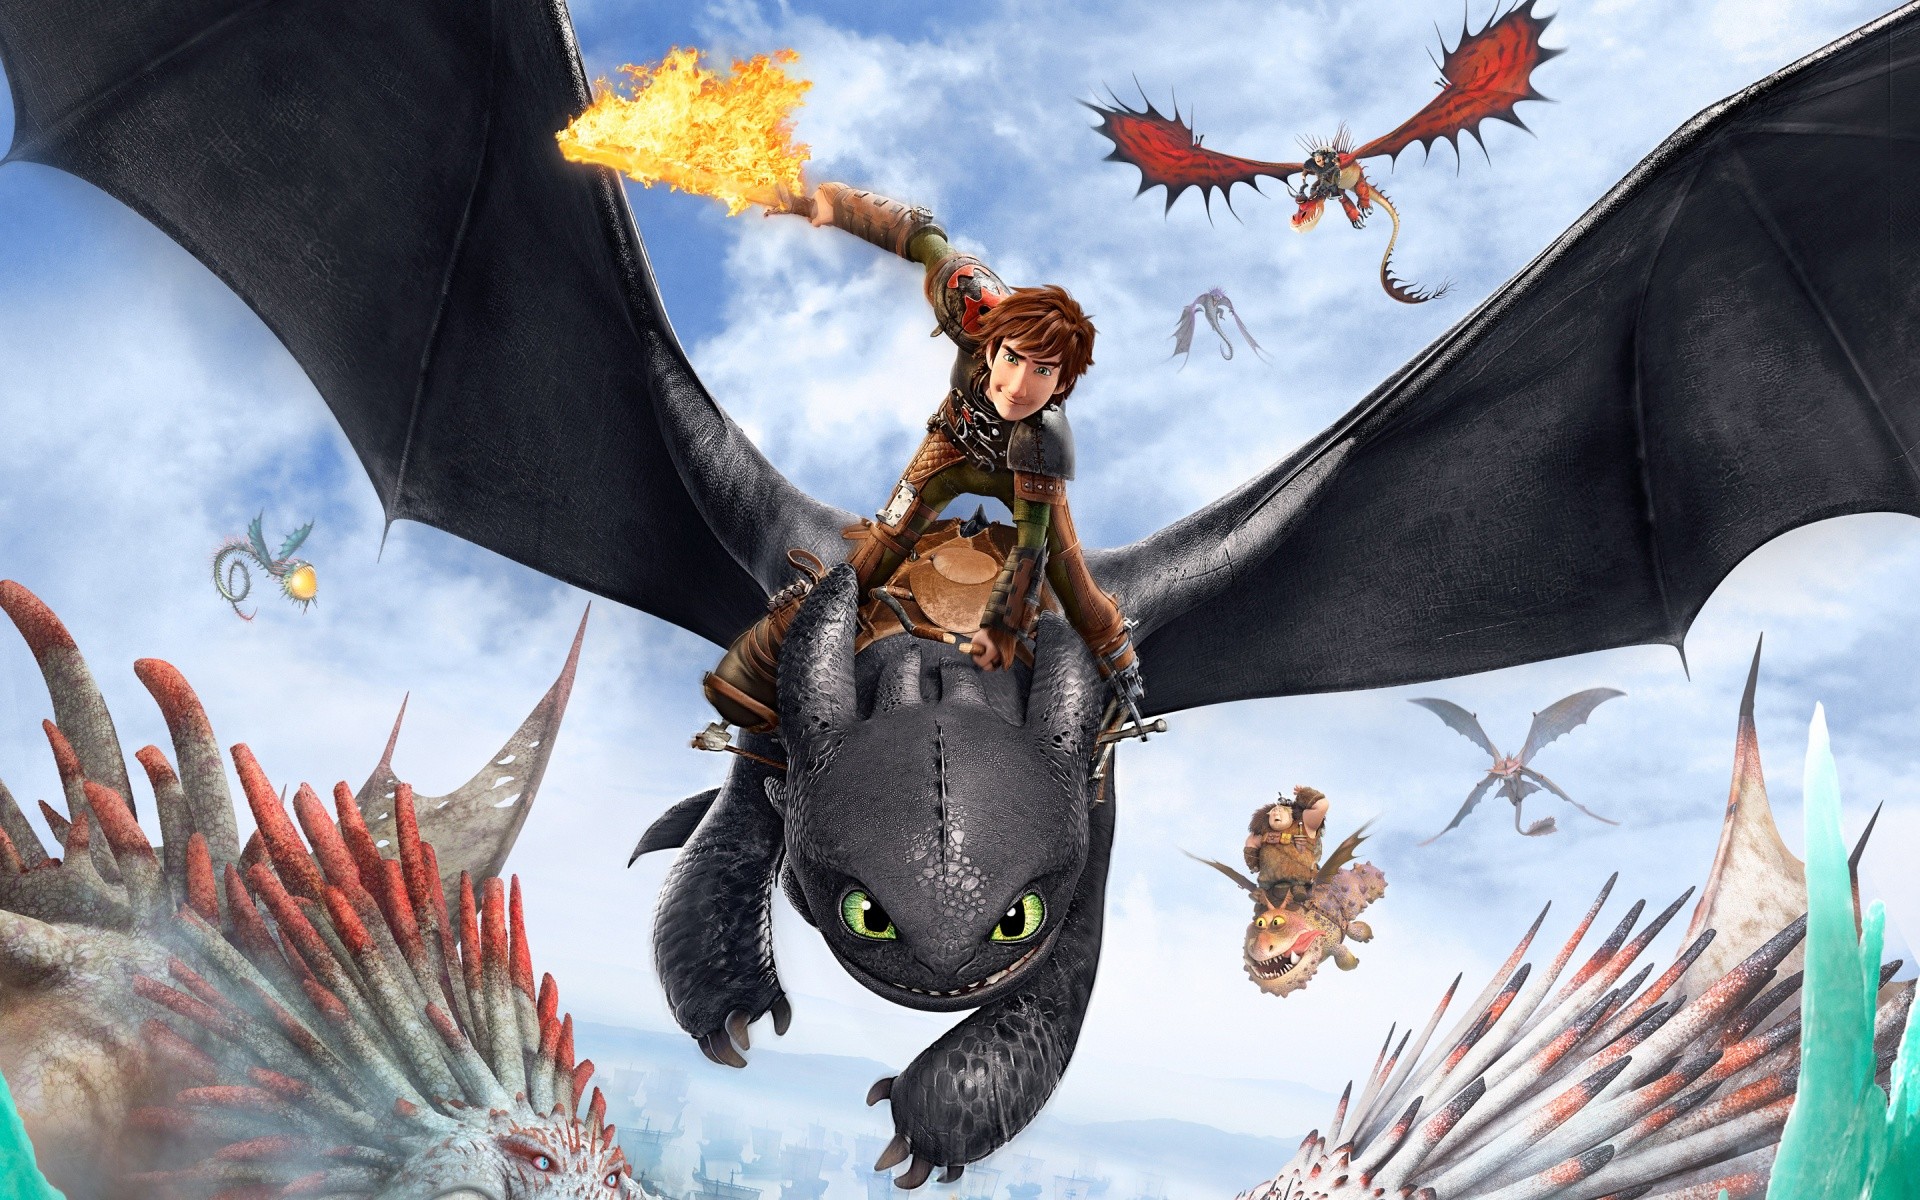 General 1920x1200 How to Train Your Dragon How to Train Your Dragon 2 dragon movies animated movies digital art